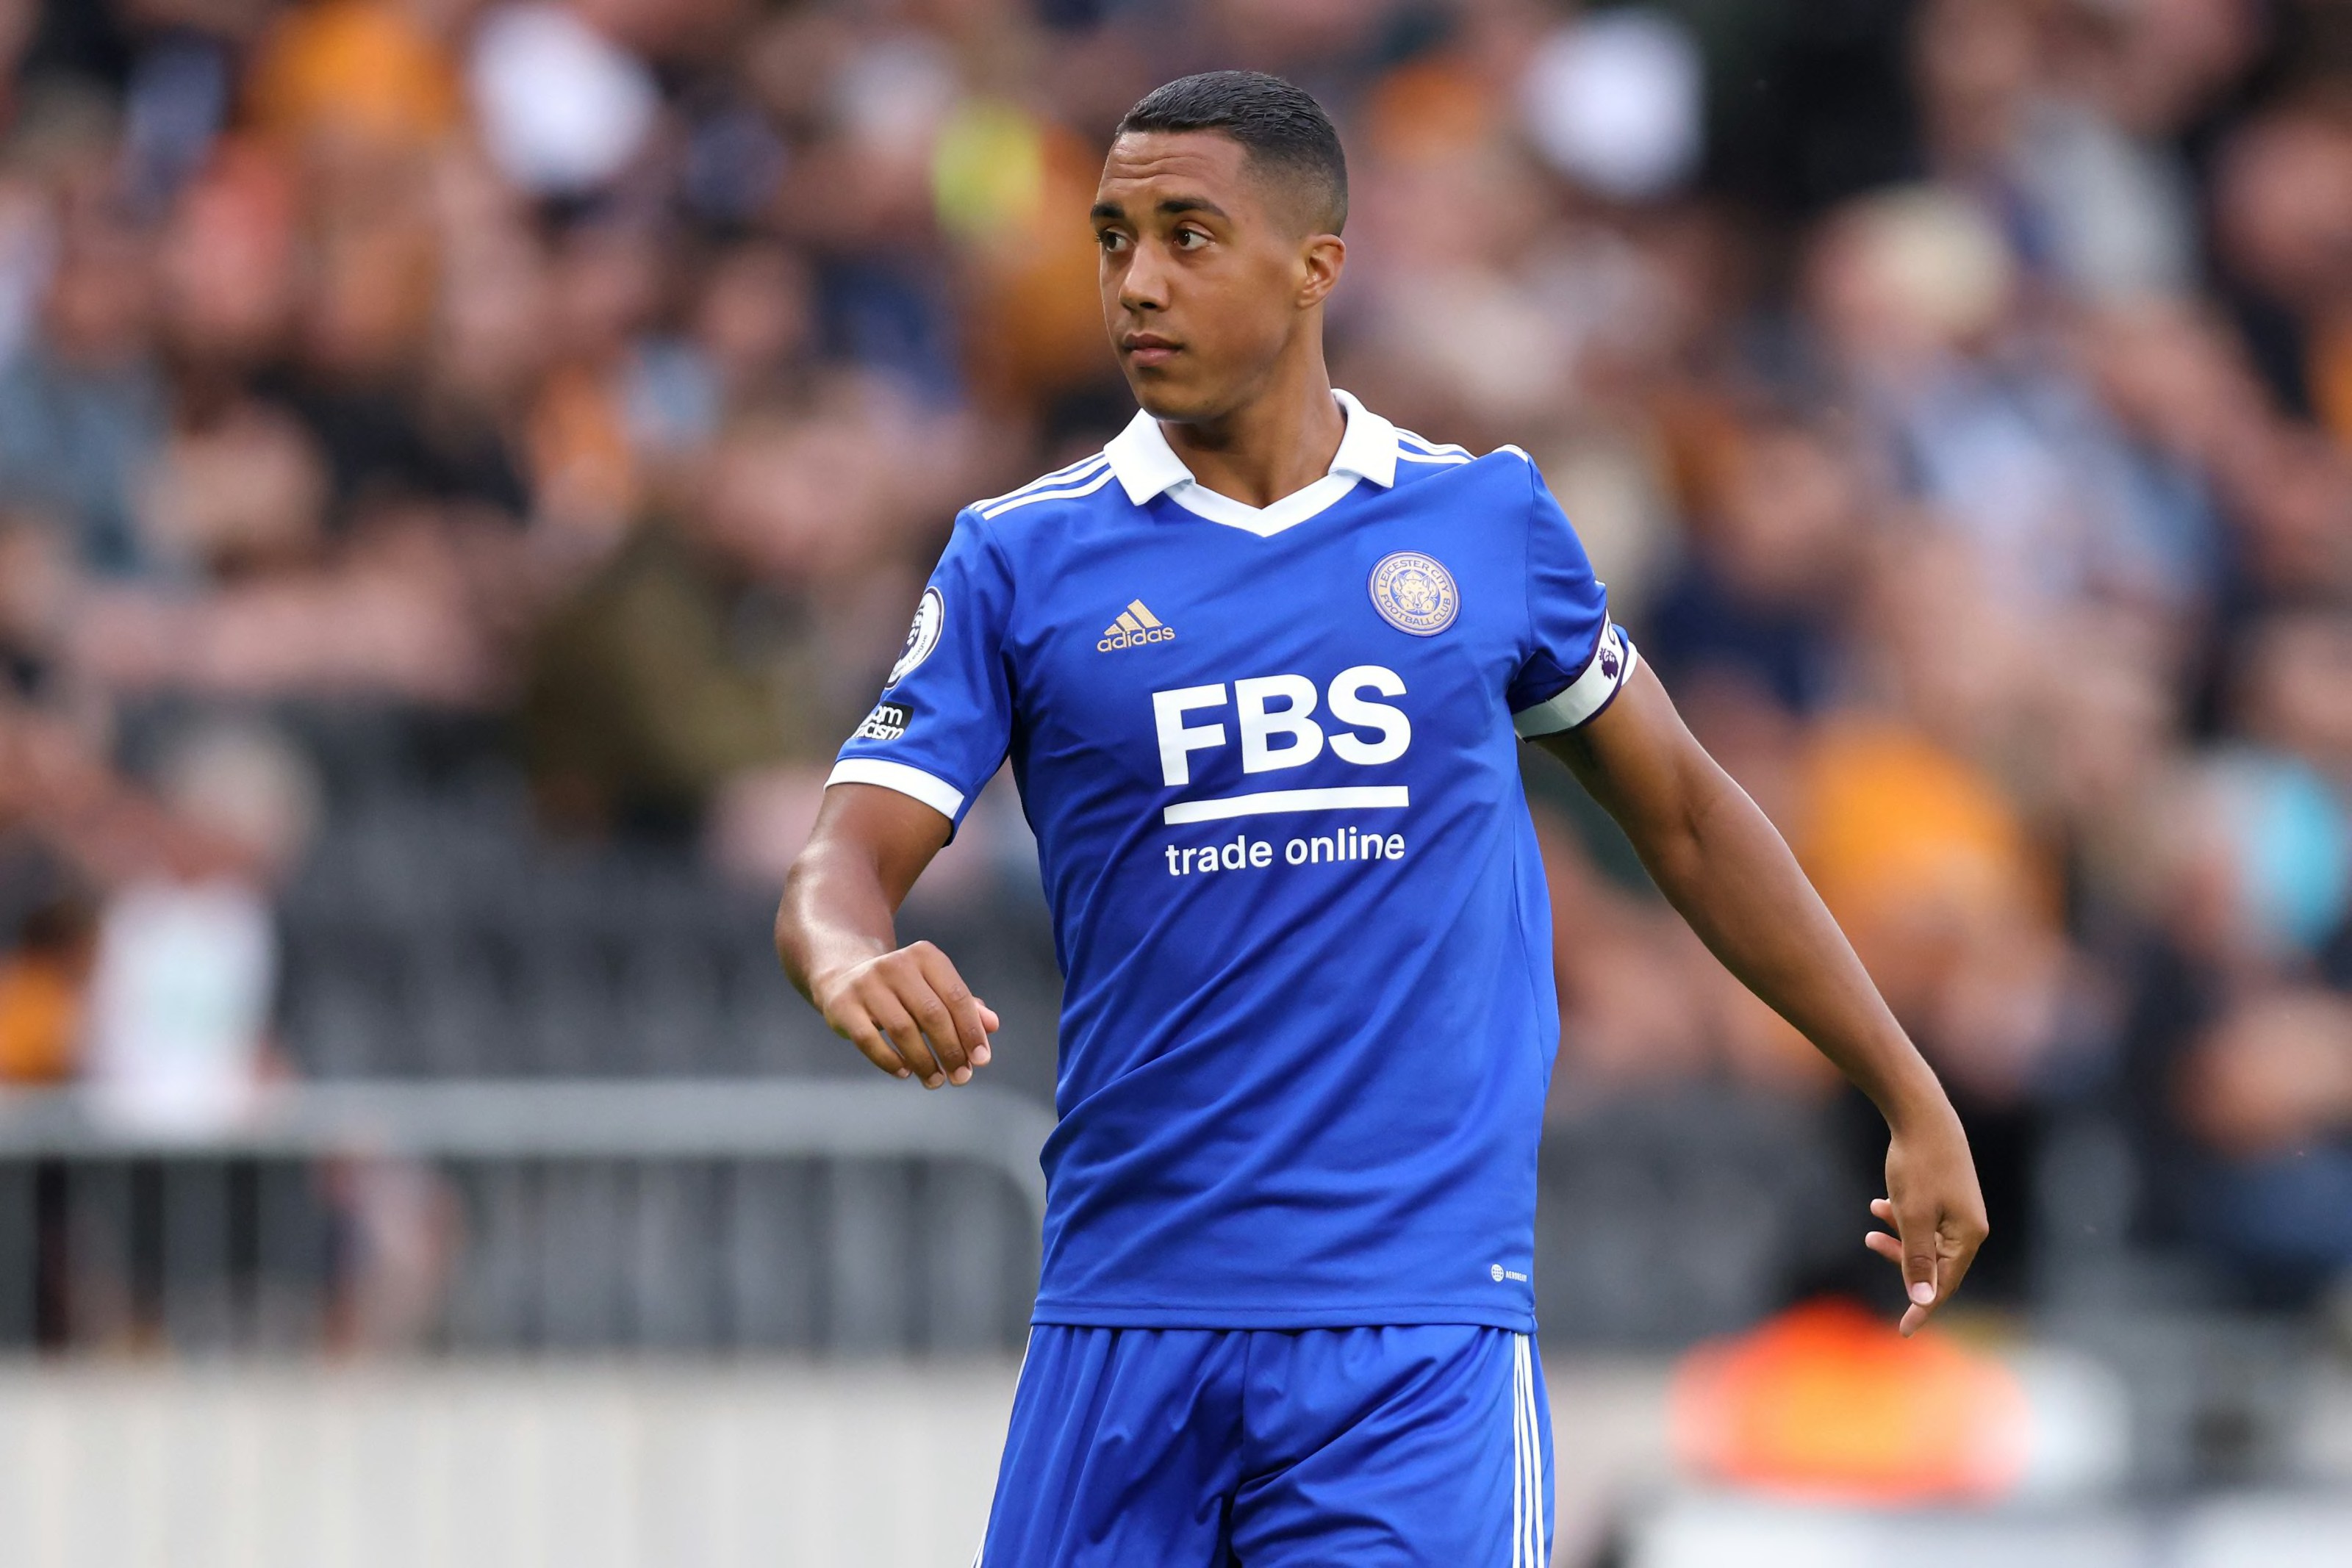 Youri Tielemans subtly hints he'll be at Leicester City for 2022/23